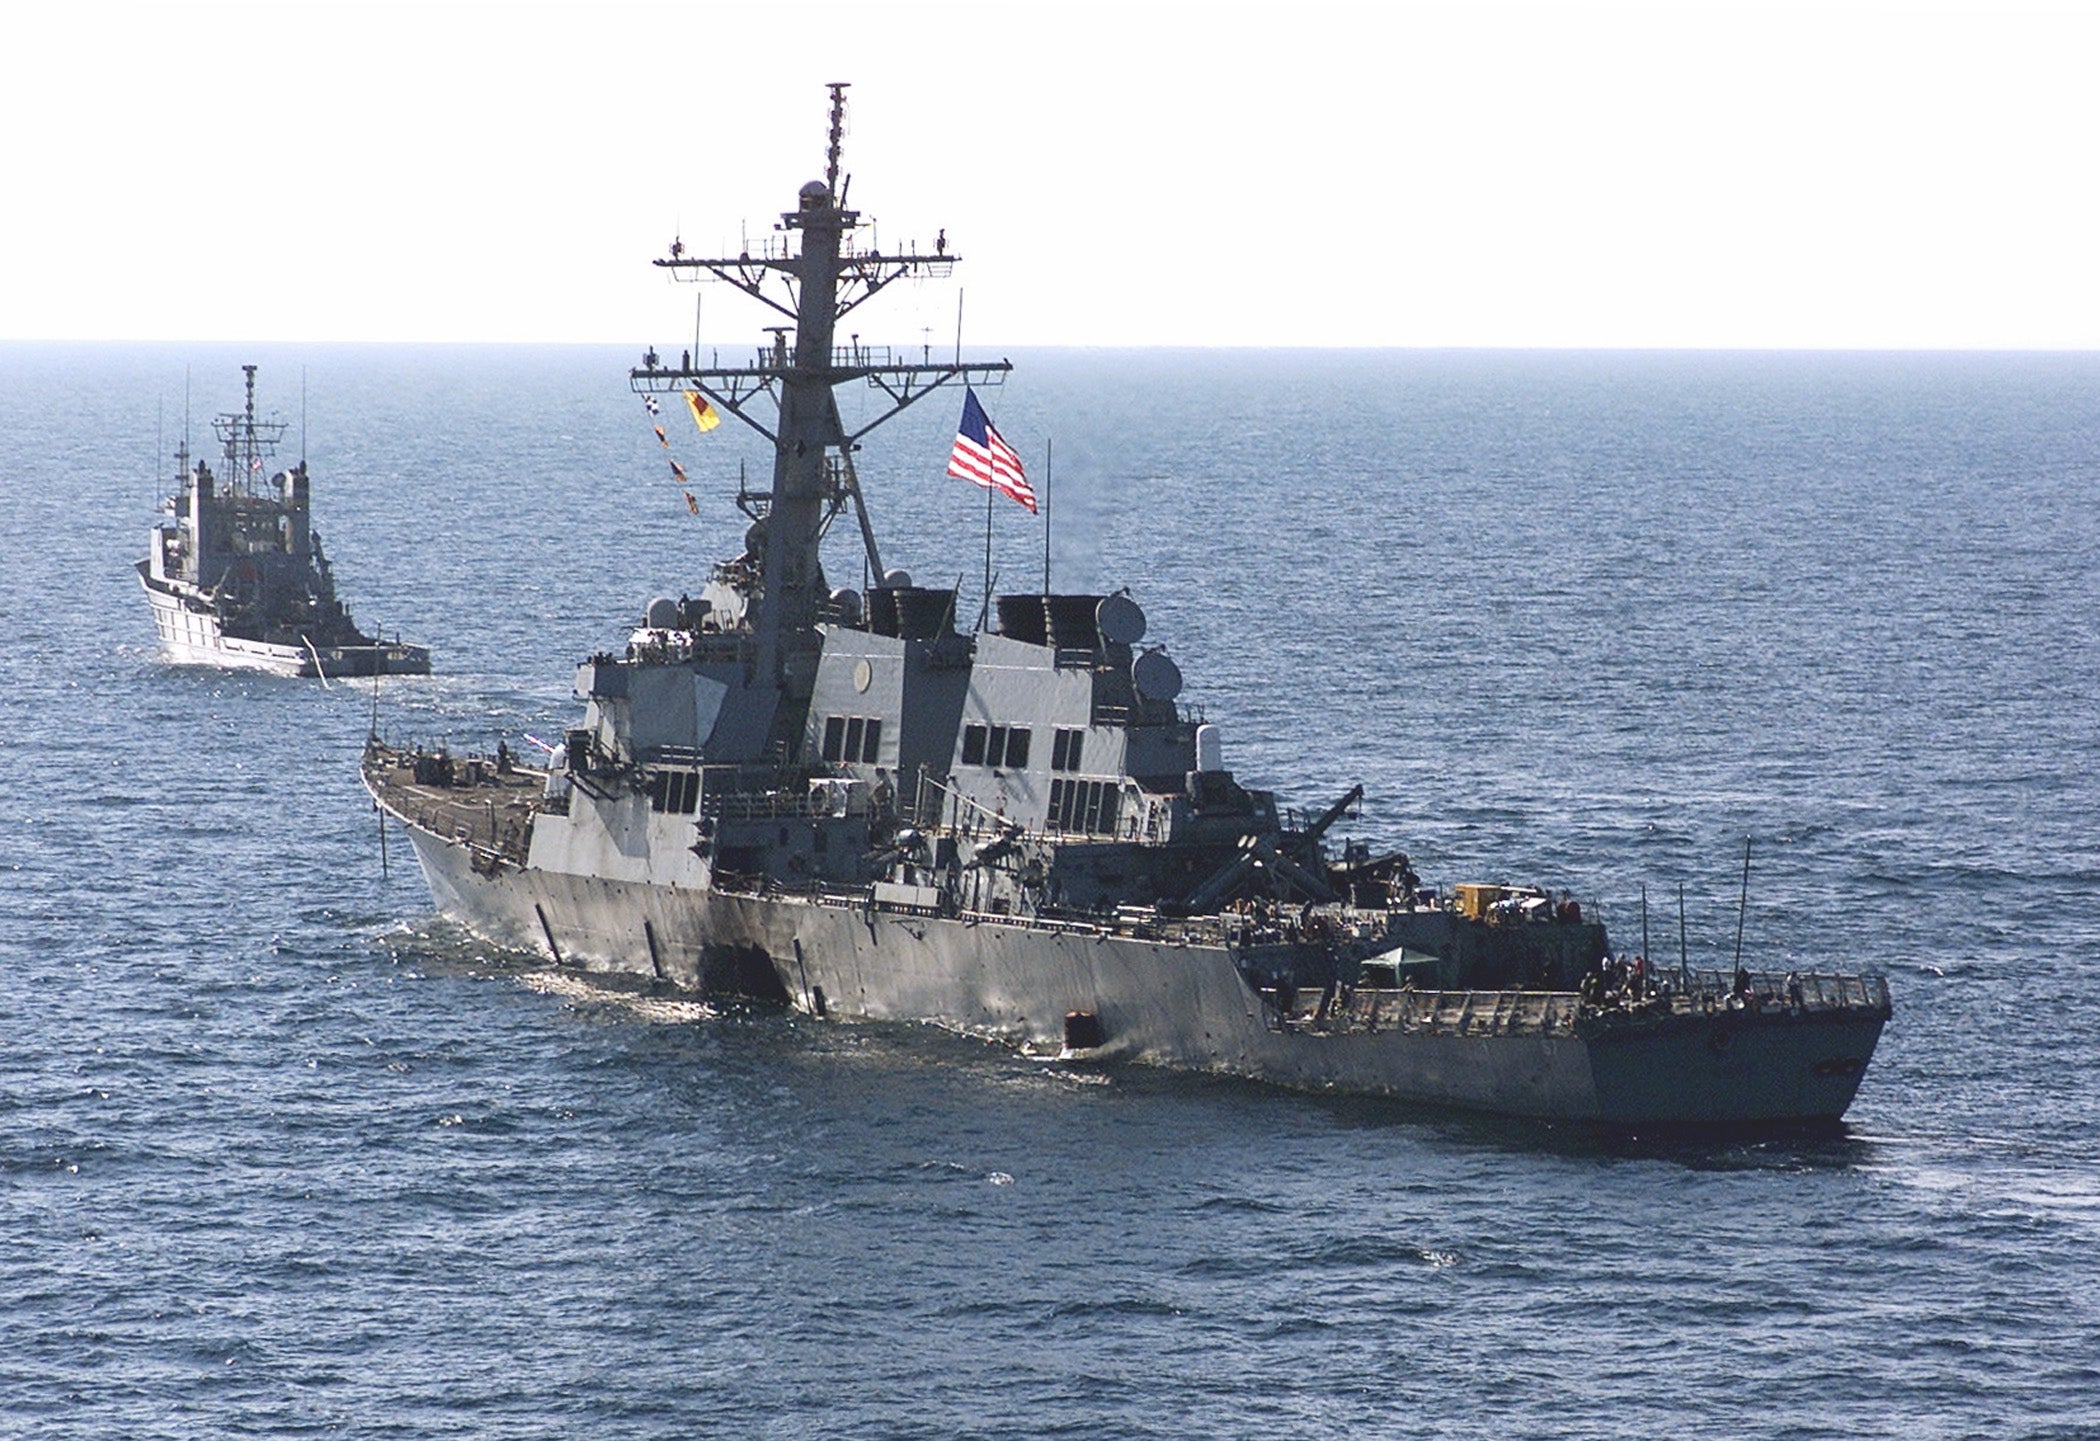 When terrorists attacked the USS Cole, crew members refused to give up the ship